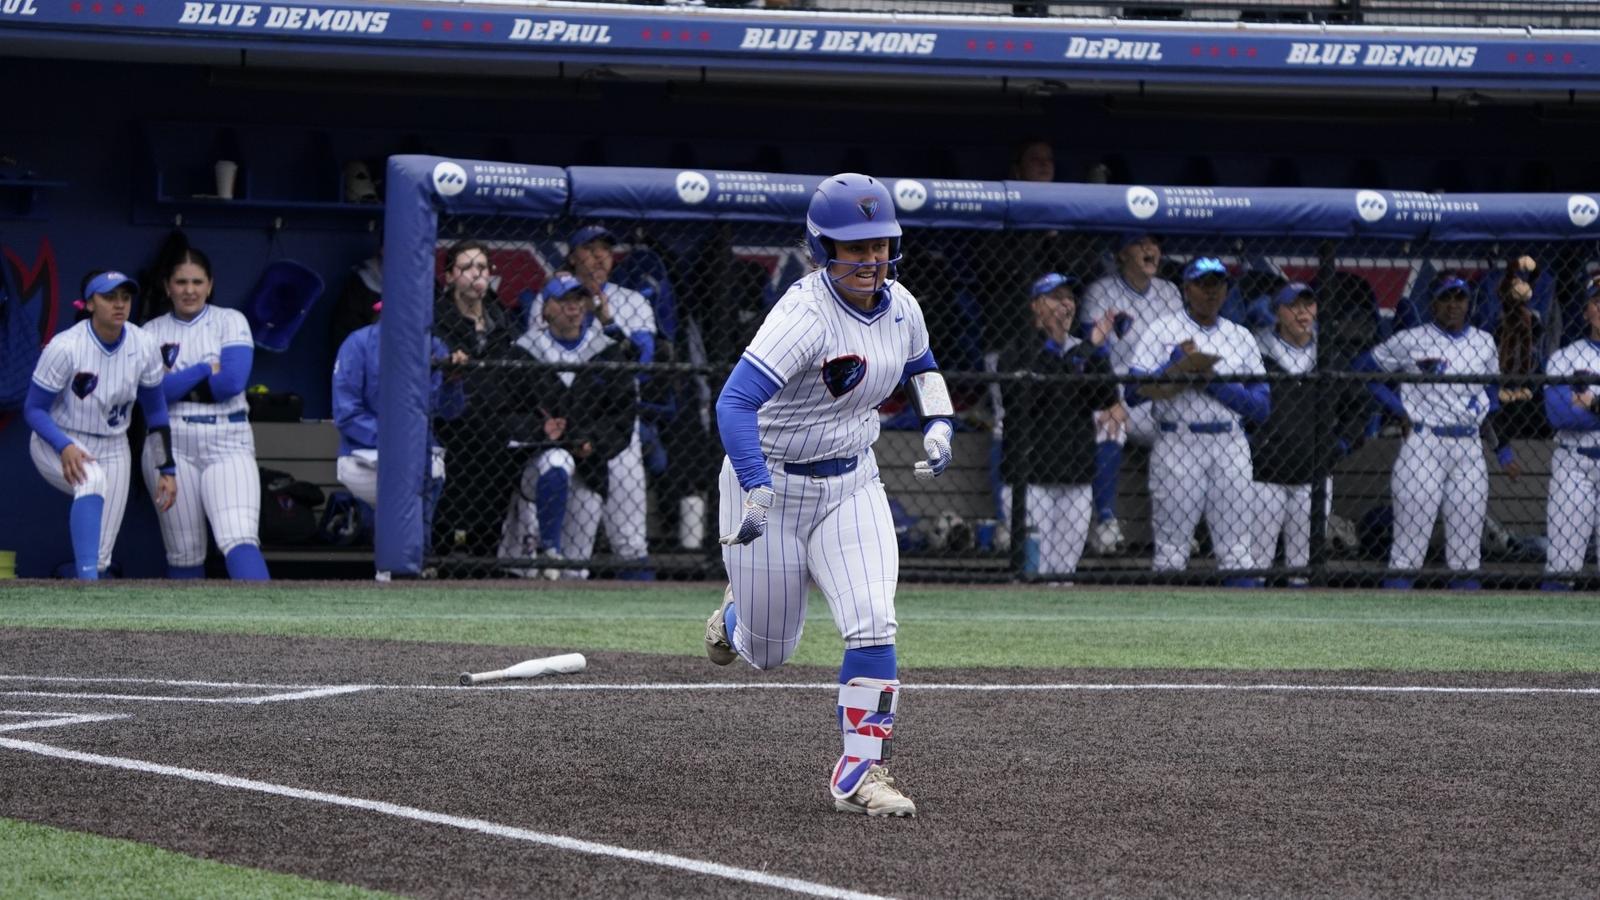 DePaul Softball Falls Twice to Creighton in Saturday Doubleheader: Alvers Shines with Home Run and 3 RBIs